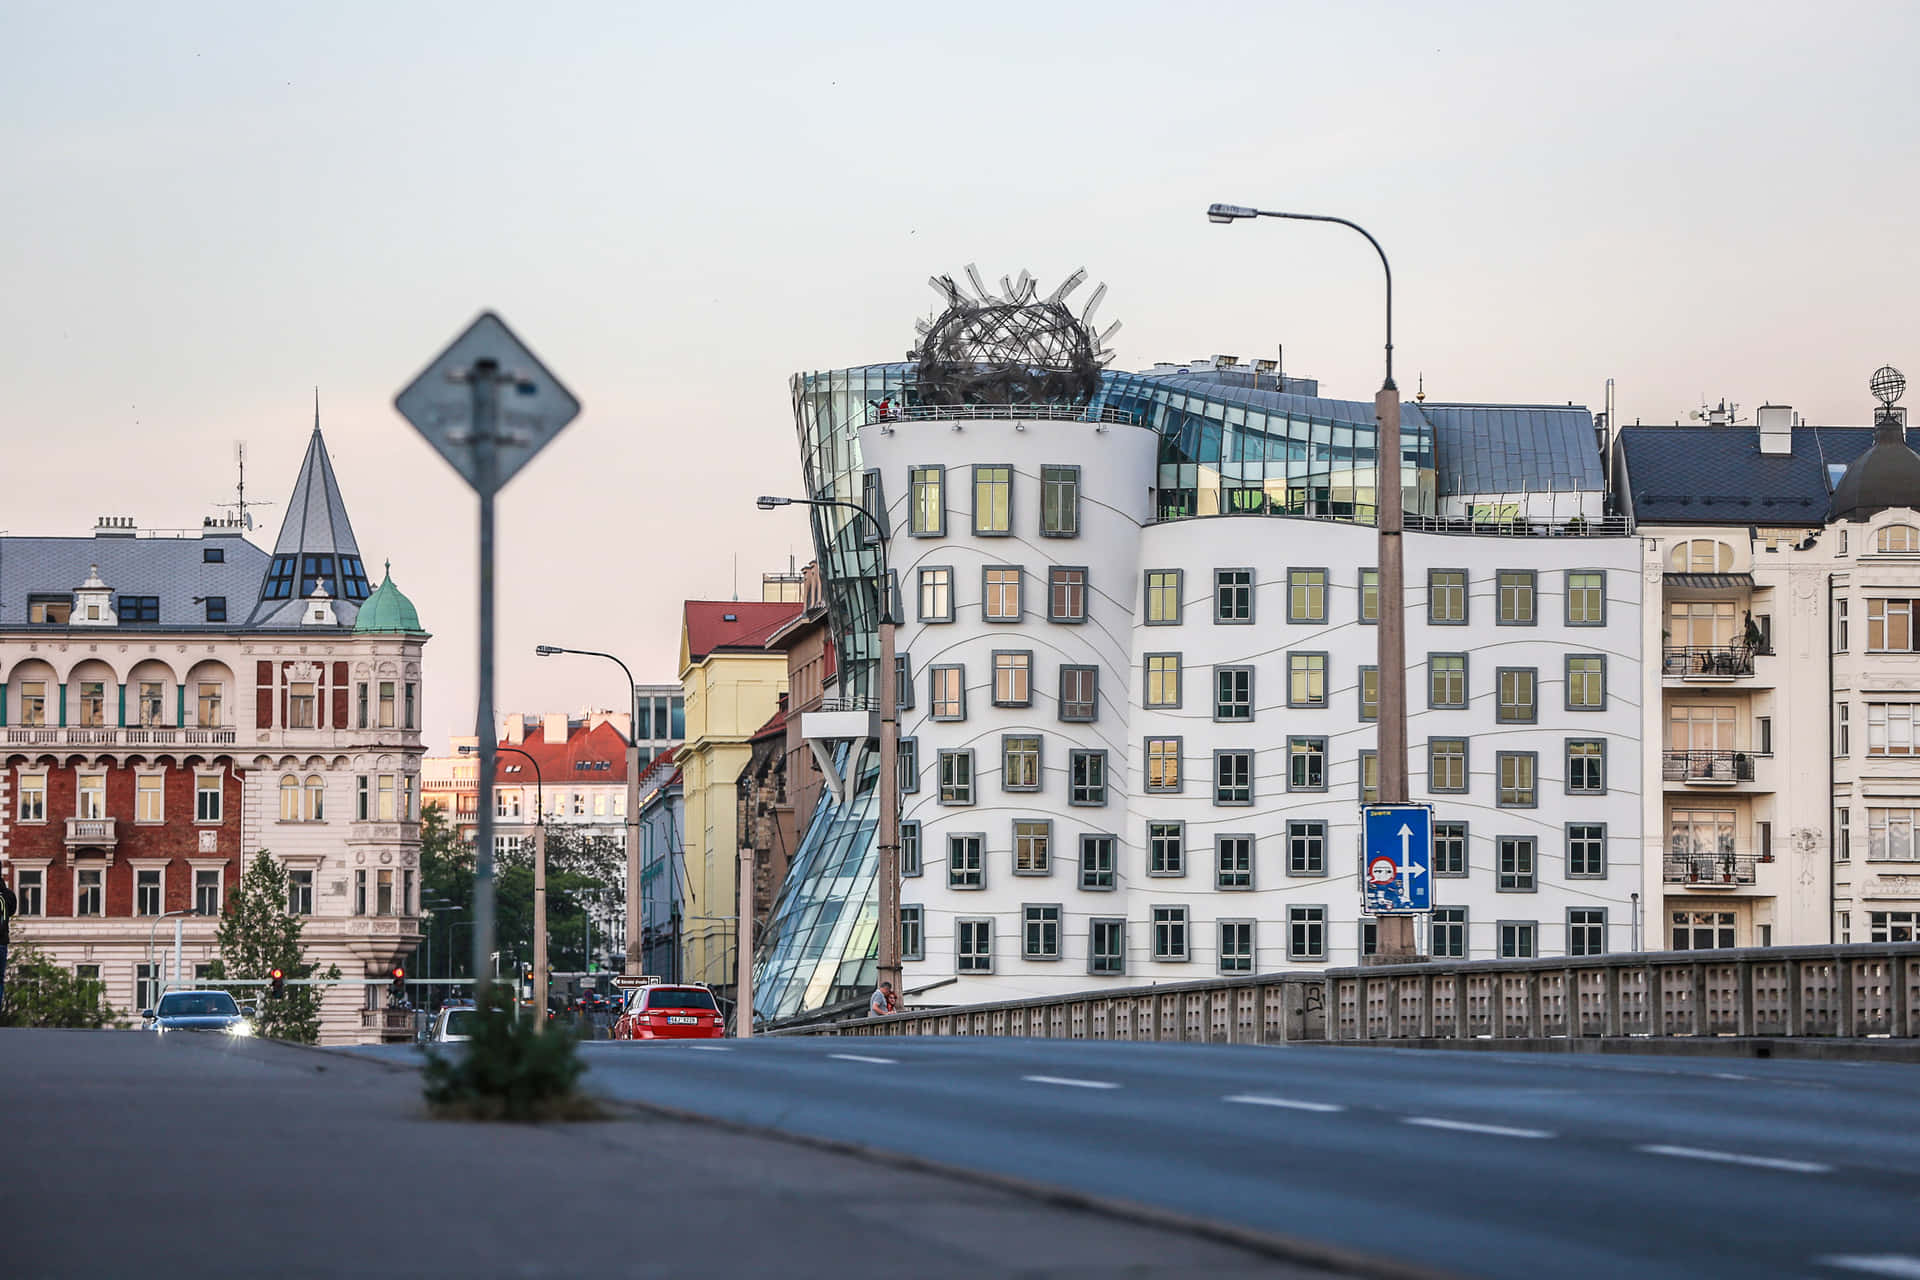 Sophisticated Architecture of the Dancing House Wallpaper